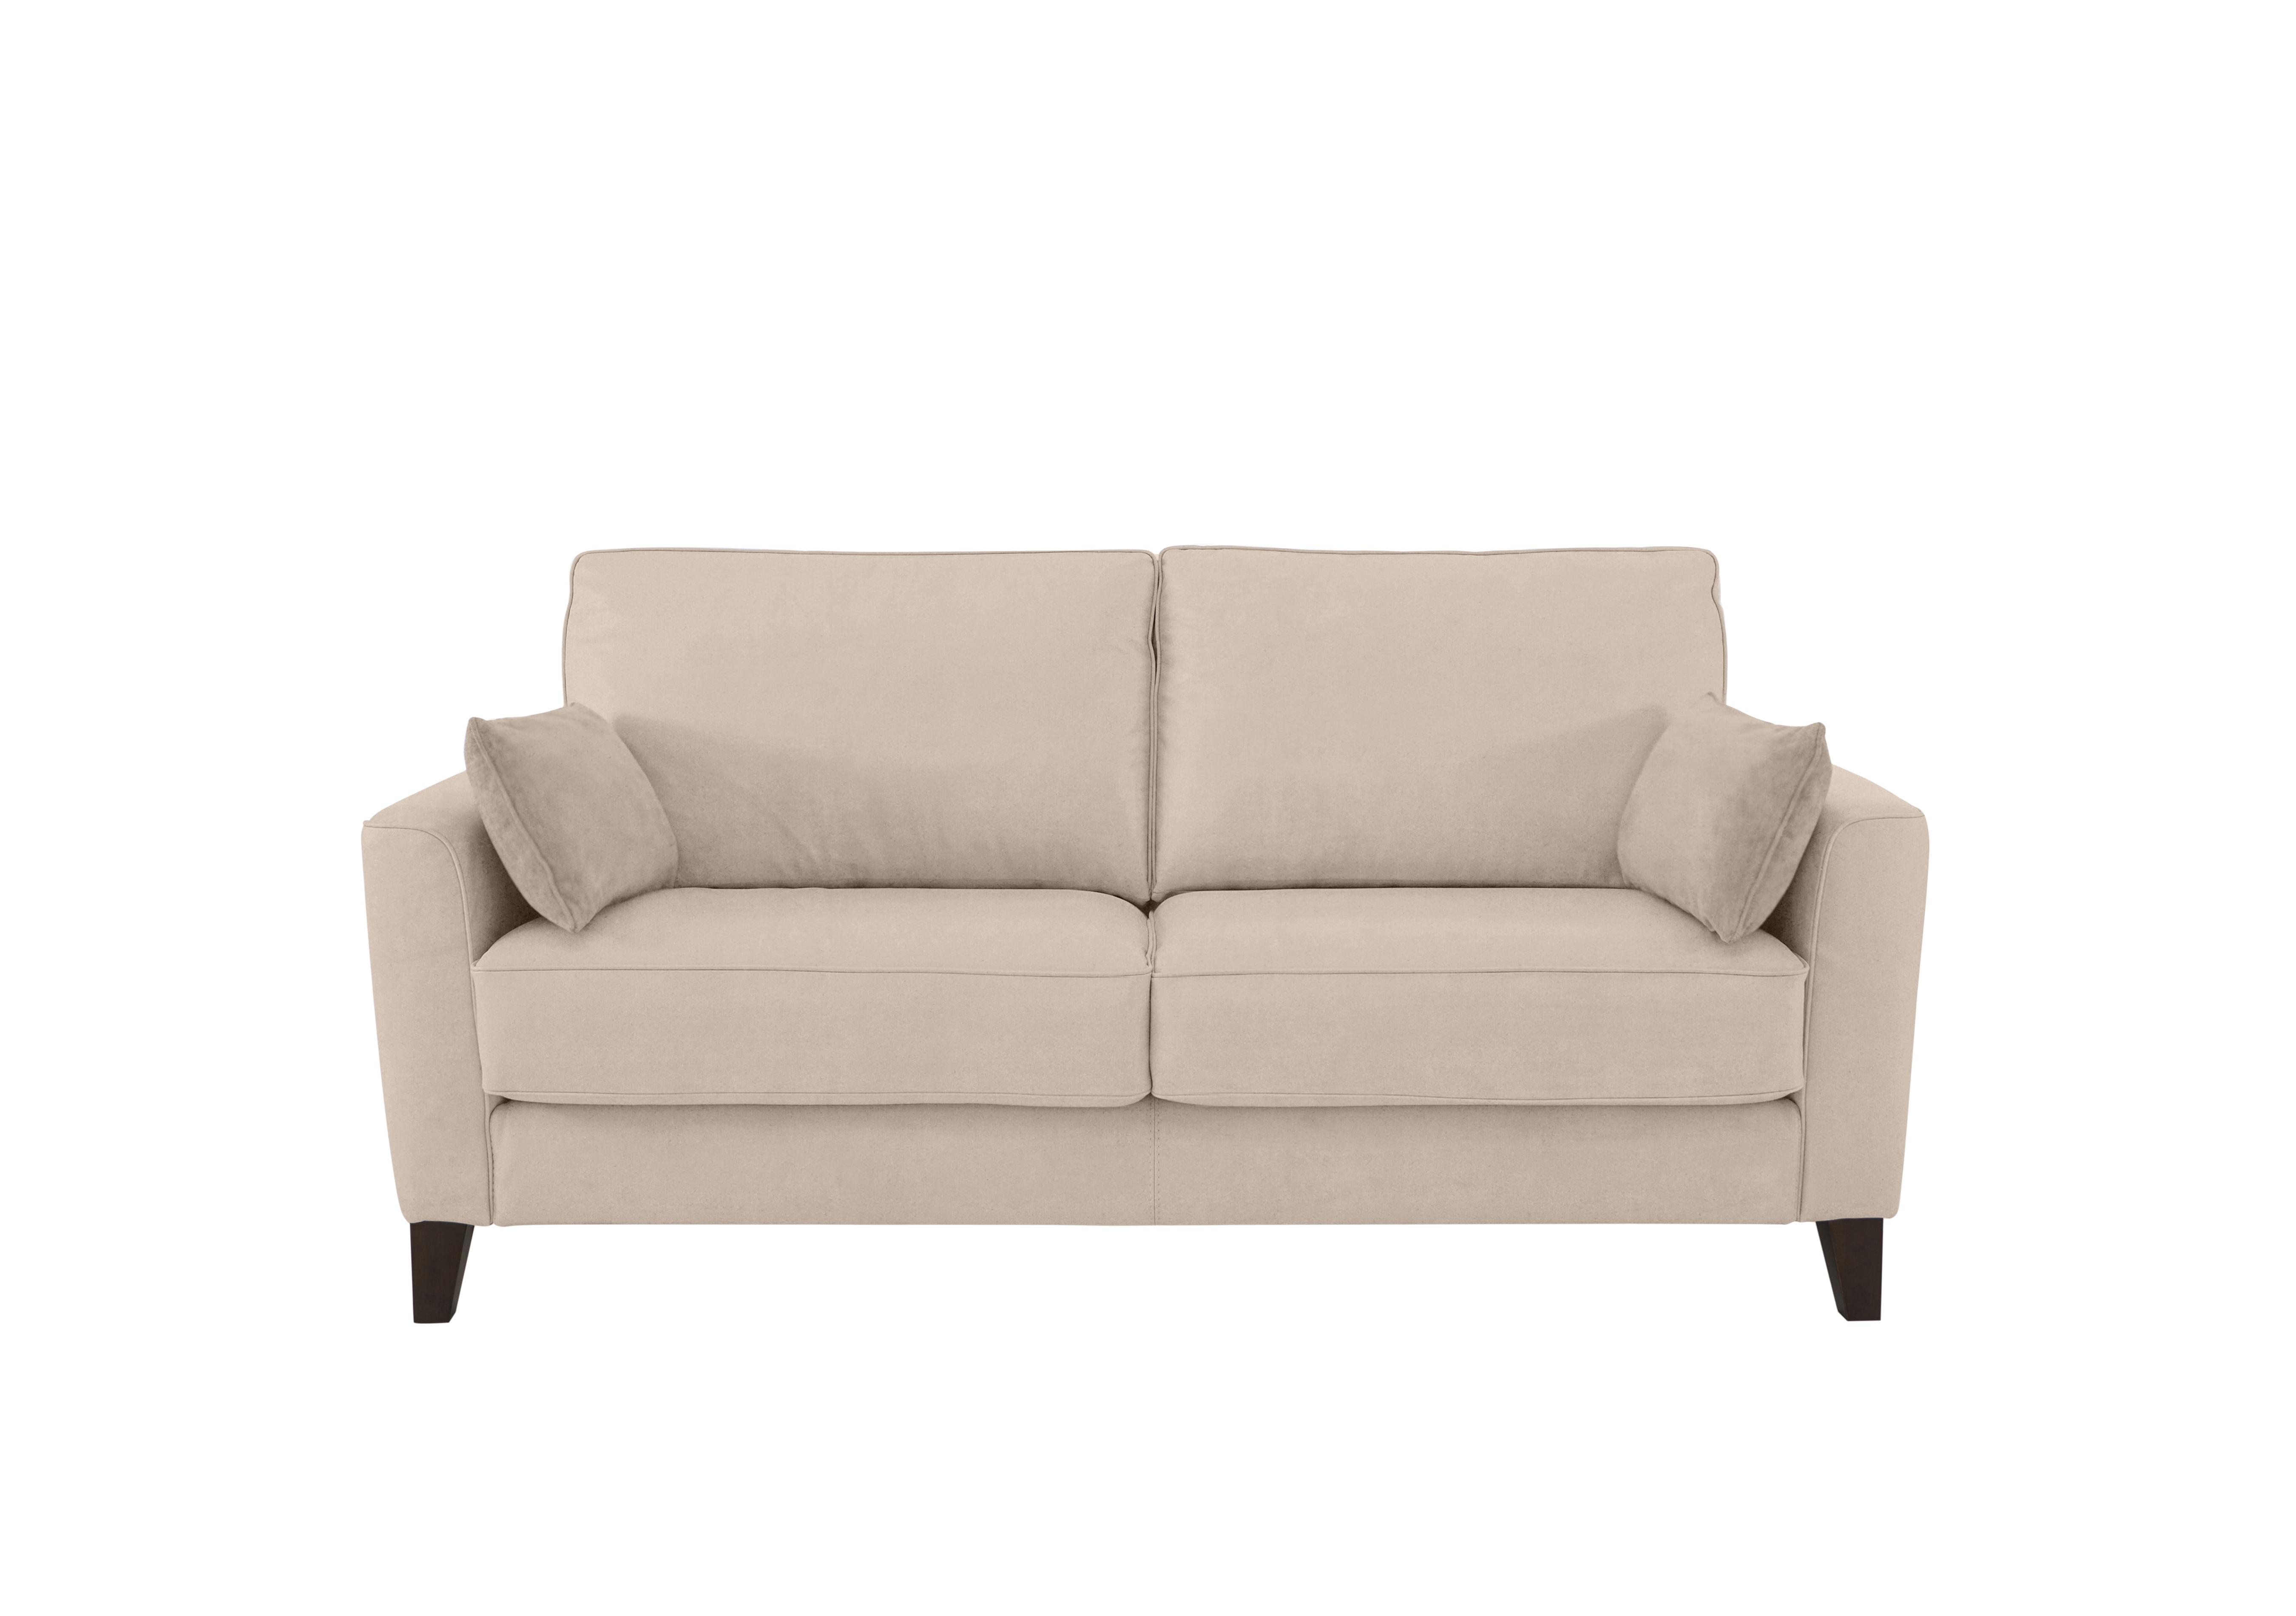 Brondby 2 Seater Fabric Sofa in Bfa-Blj-R20 Bisque on Furniture Village